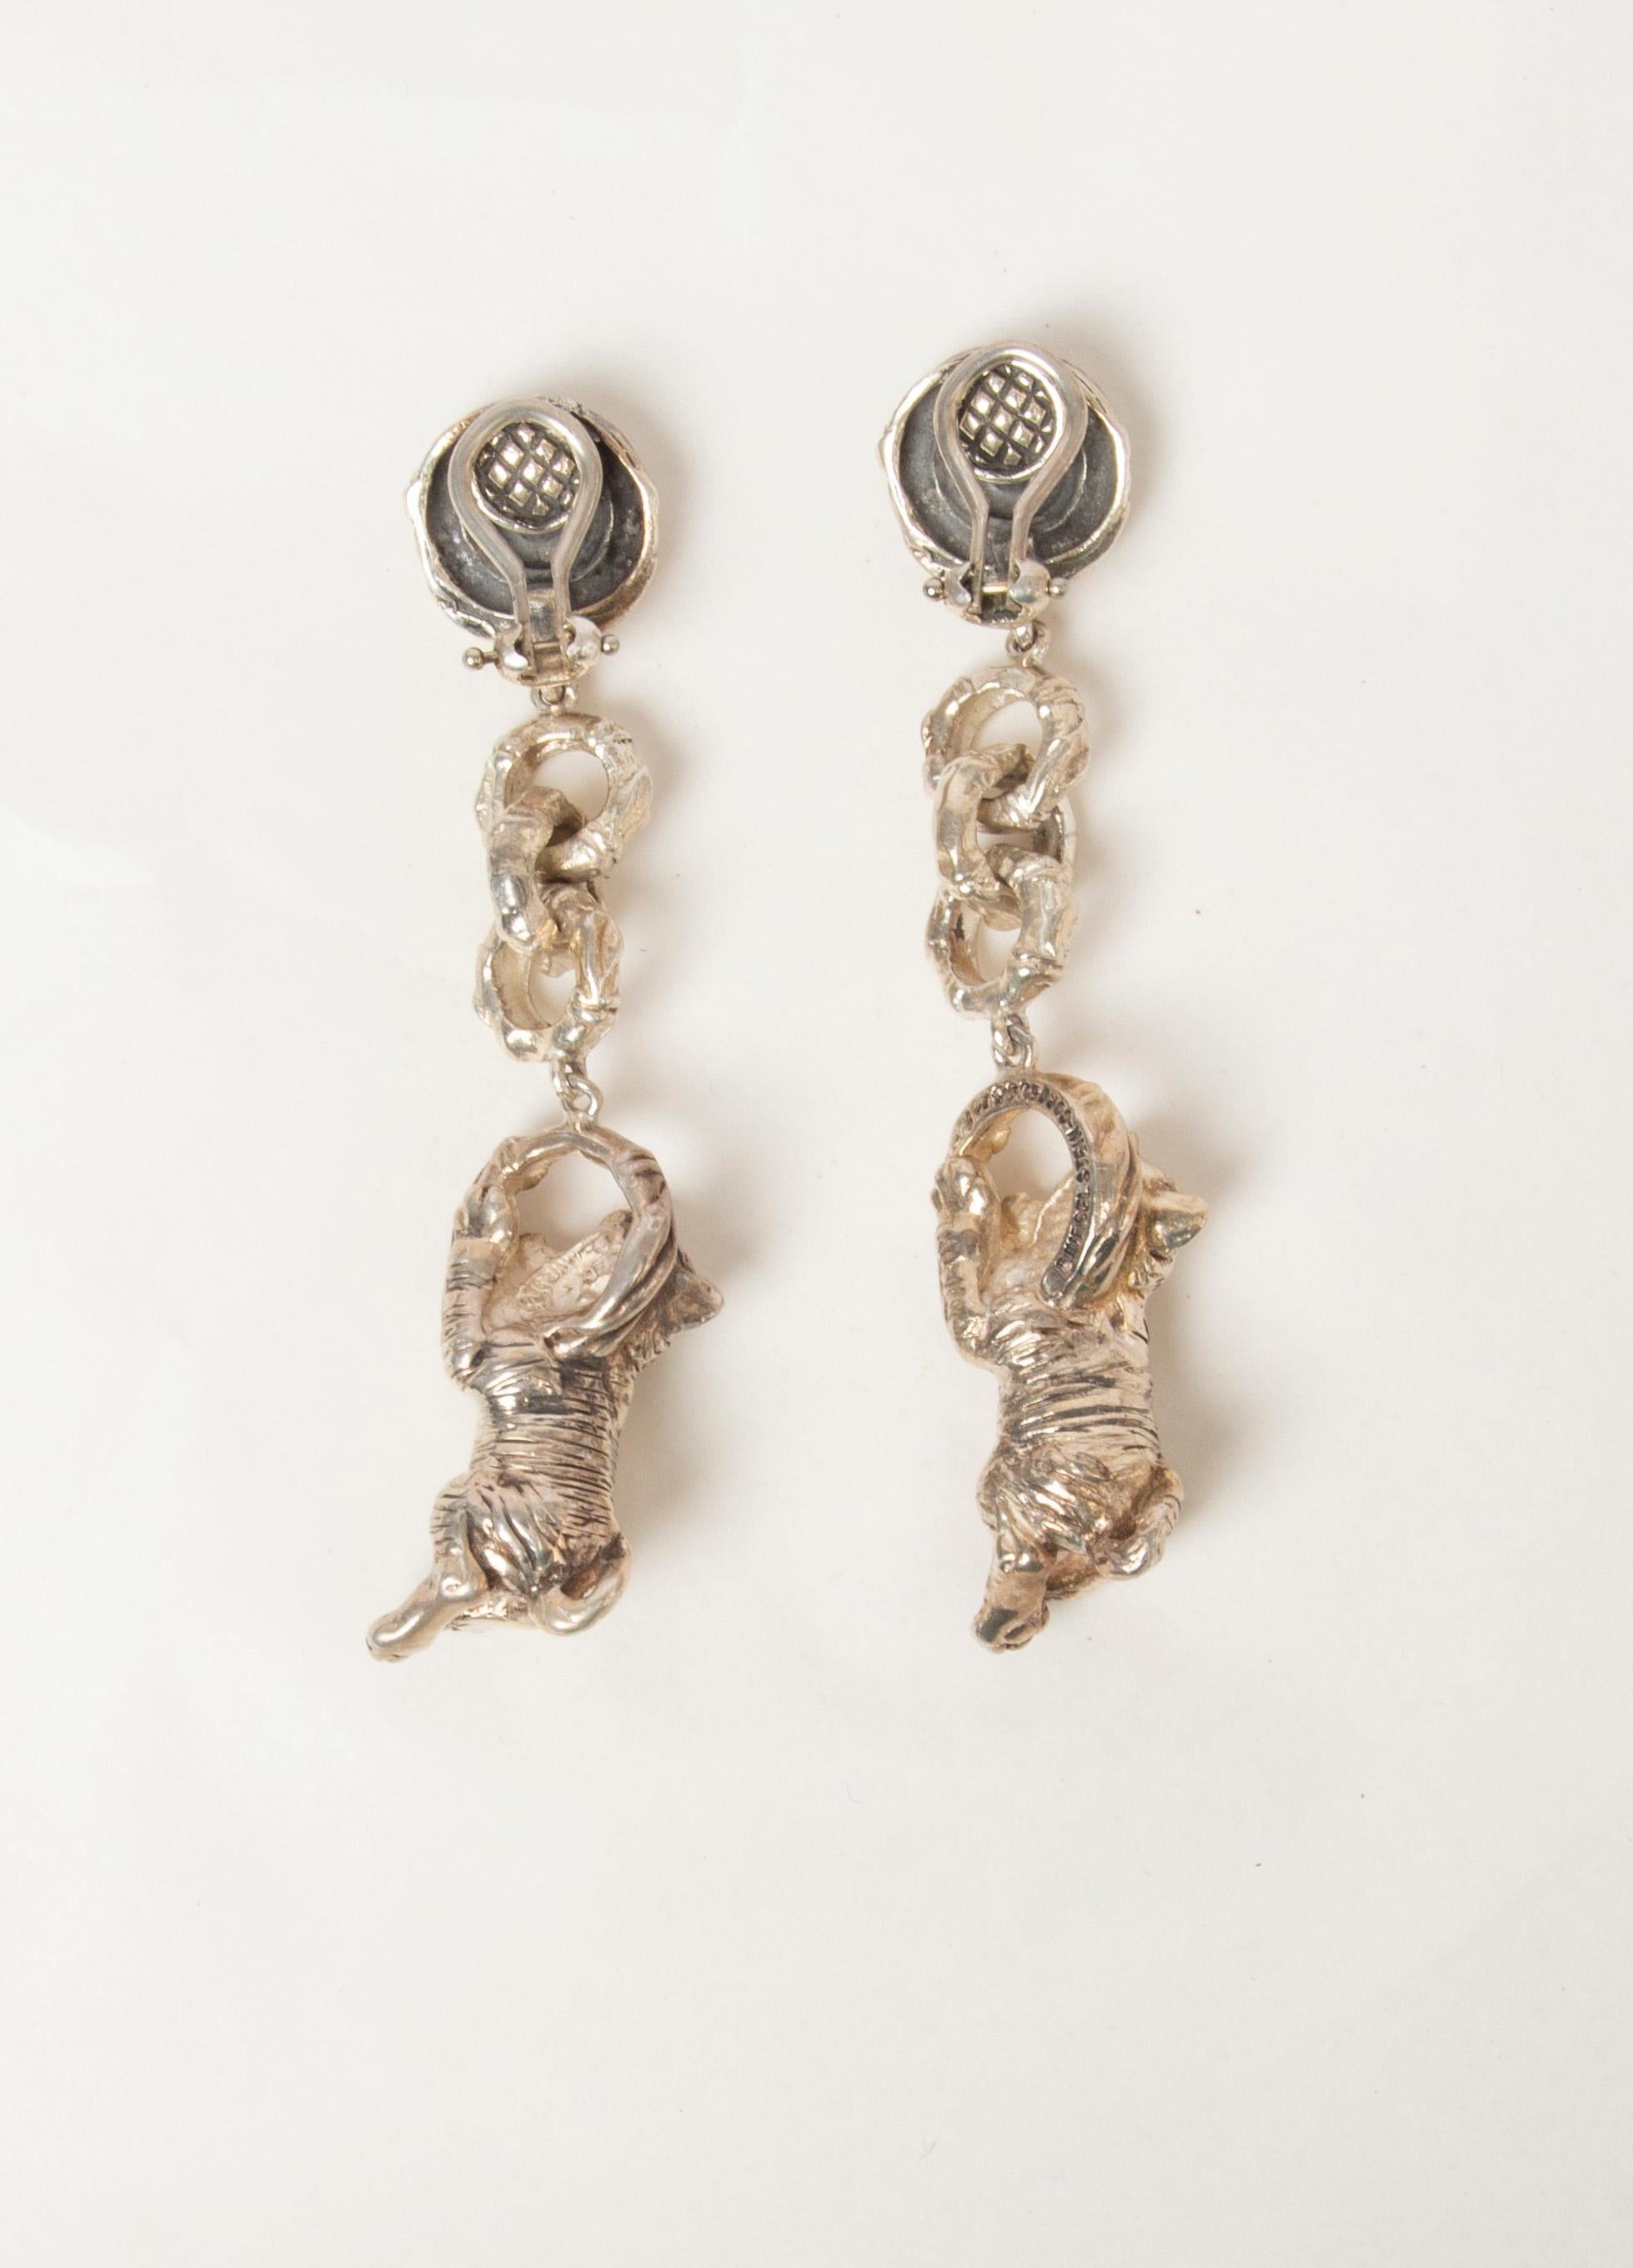 100% authentic Barry Kieselstein-Cord drop clip-on earrings in sterling silver with tiger cub pendants. Have been worn and are in excellent condition.

Measurements
Width	1.2cm (0.5in)
Length	6.5cm (2.5in)
Weight (Gramms)	33g

All our listings